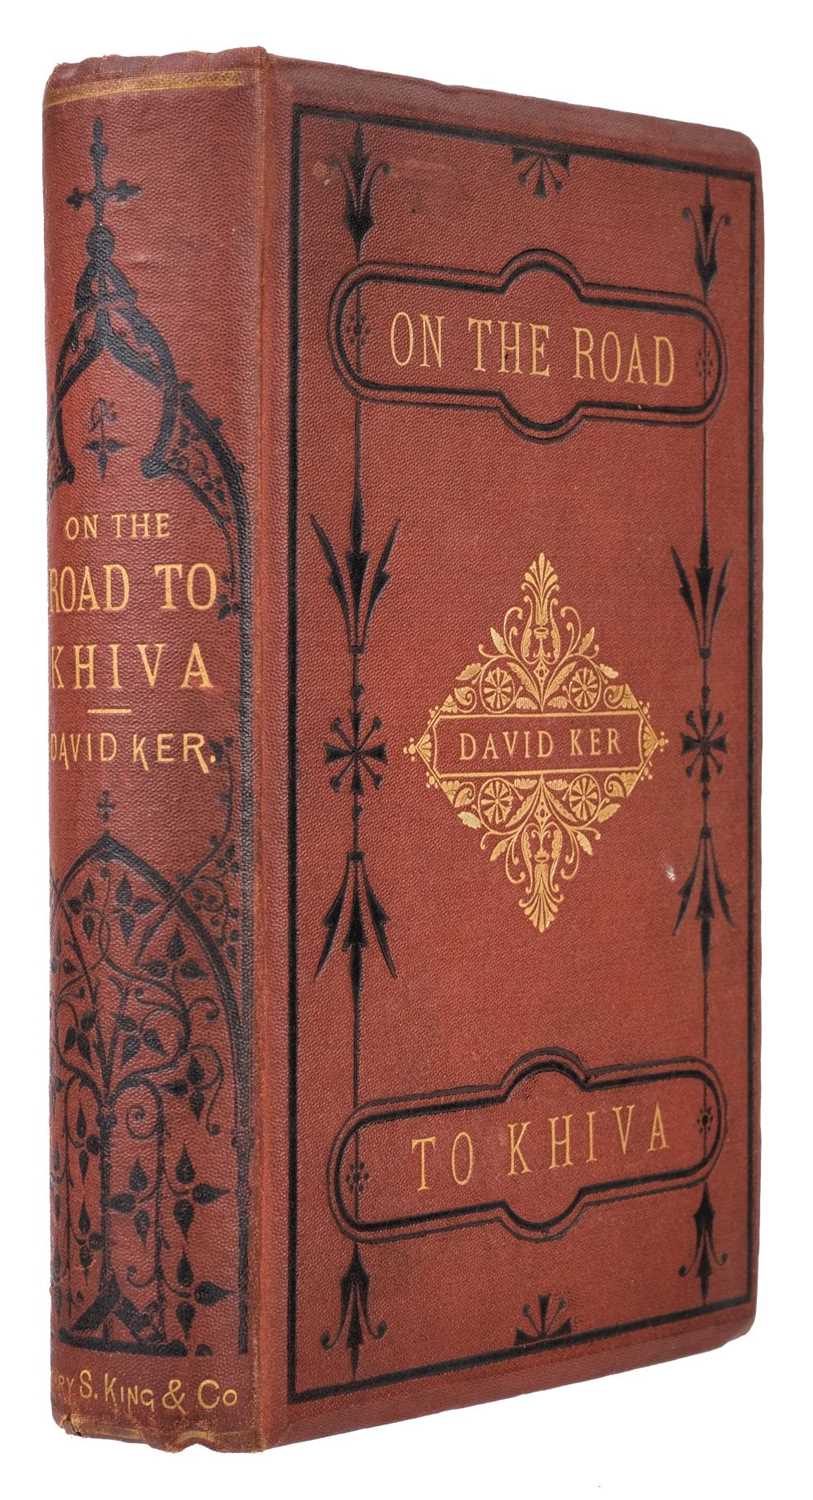 Lot 19 - Ker (David). On The Road to Khiva, 1st edition, London: Henry S. King & Co, 1874